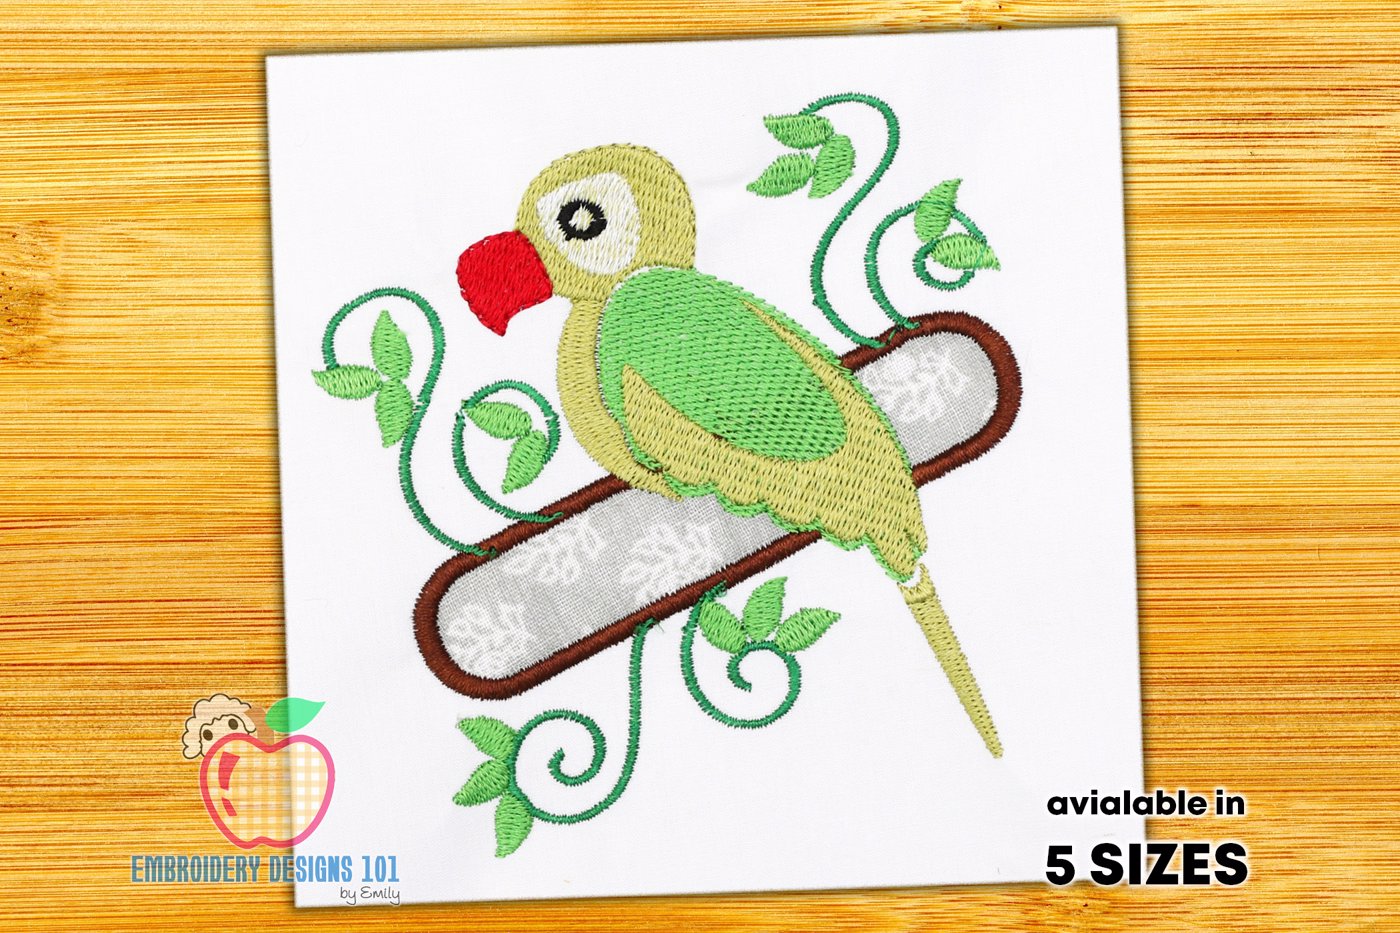 A Parrot Sitting On The Branch With Flowers Applique